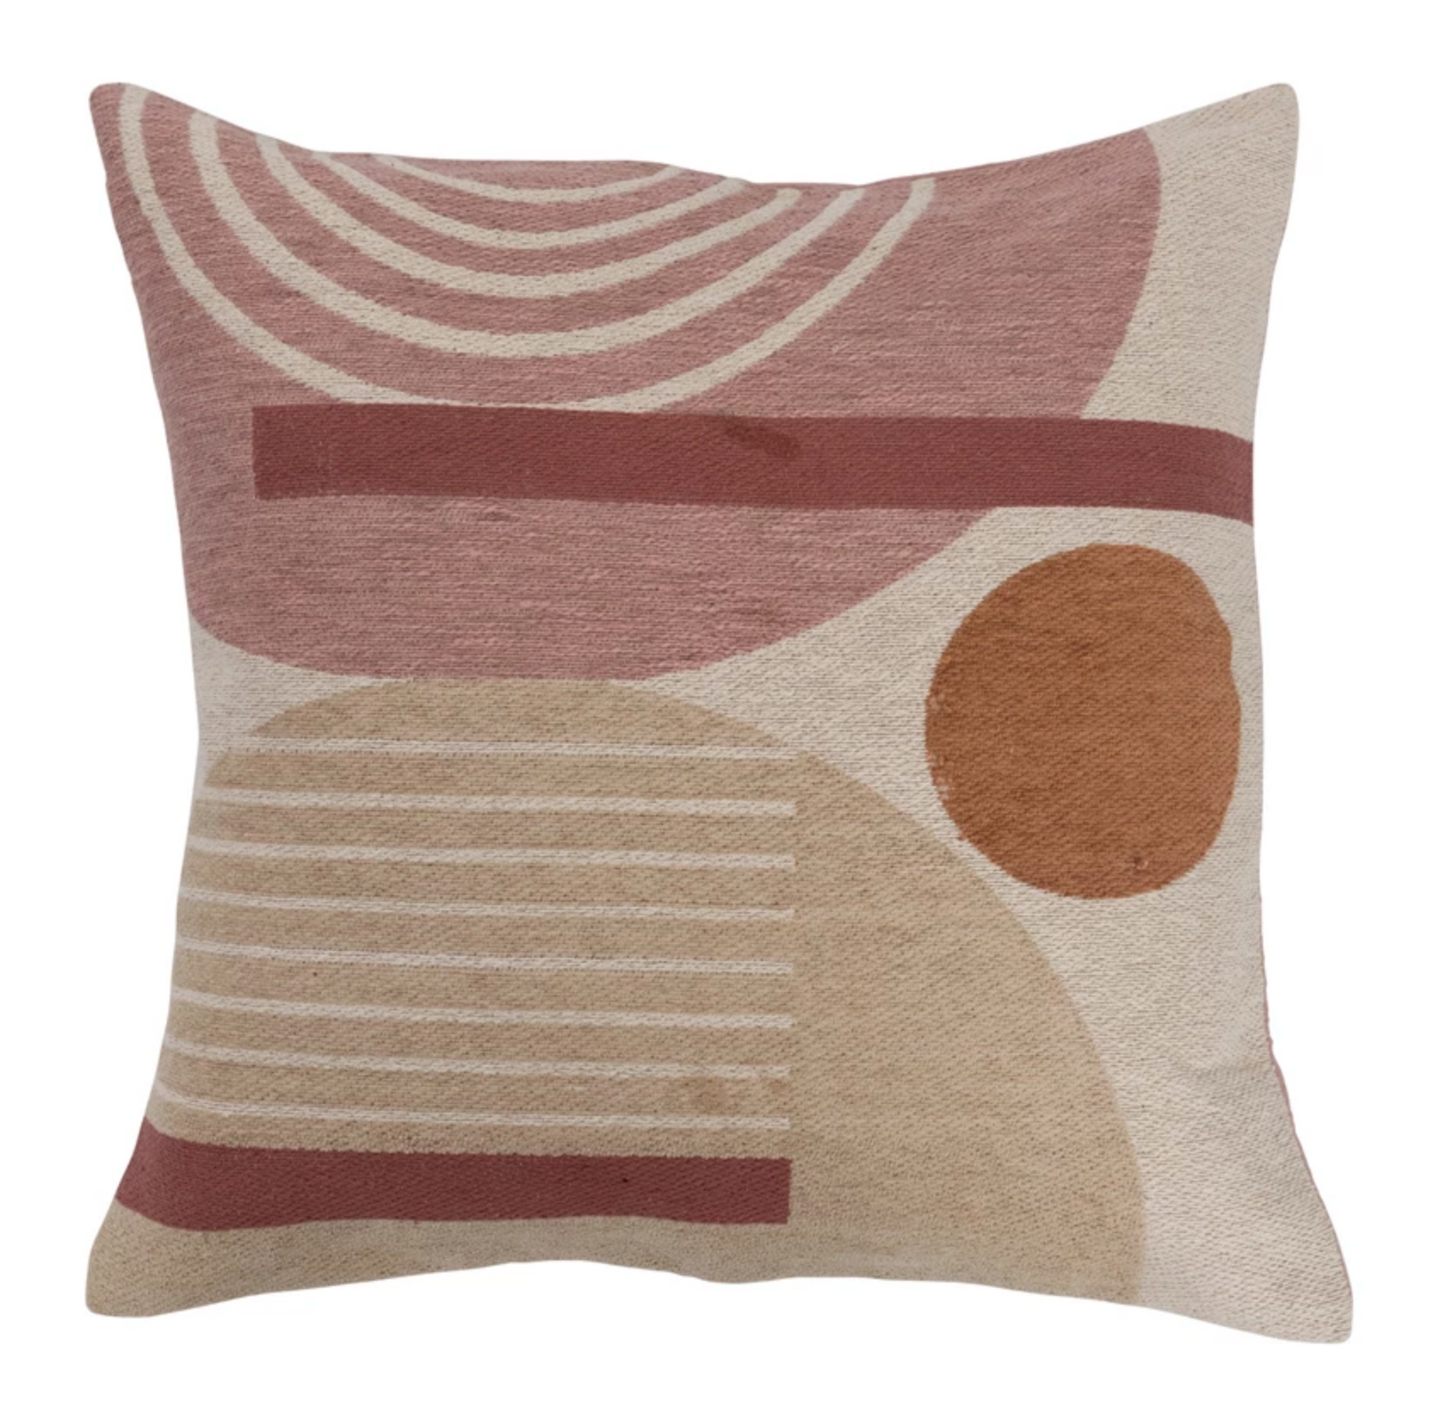 Load image into Gallery viewer, Simplicity Woven Cotton Blend Pillow w/ Abstract Design
